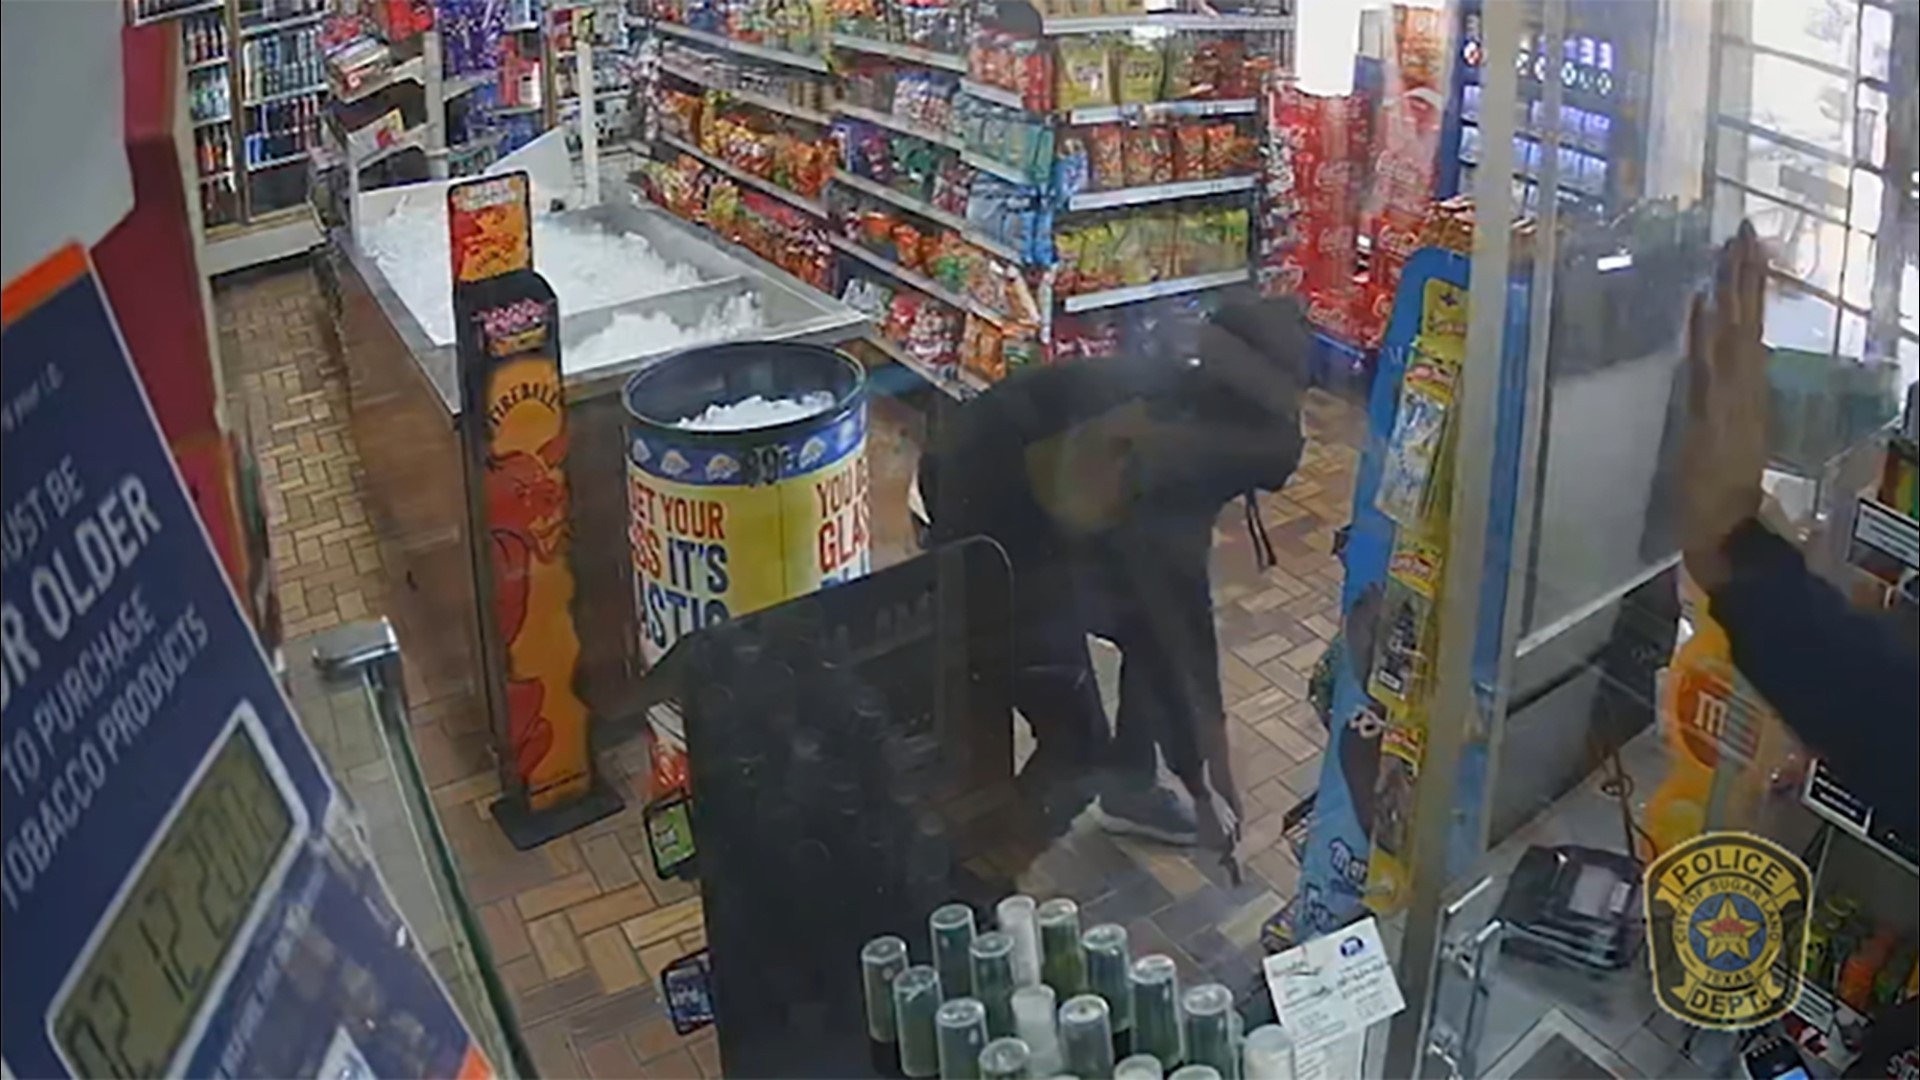 In the video, you can see the robber take cover and then run out of the store when he saw the gun in the clerk's hands.